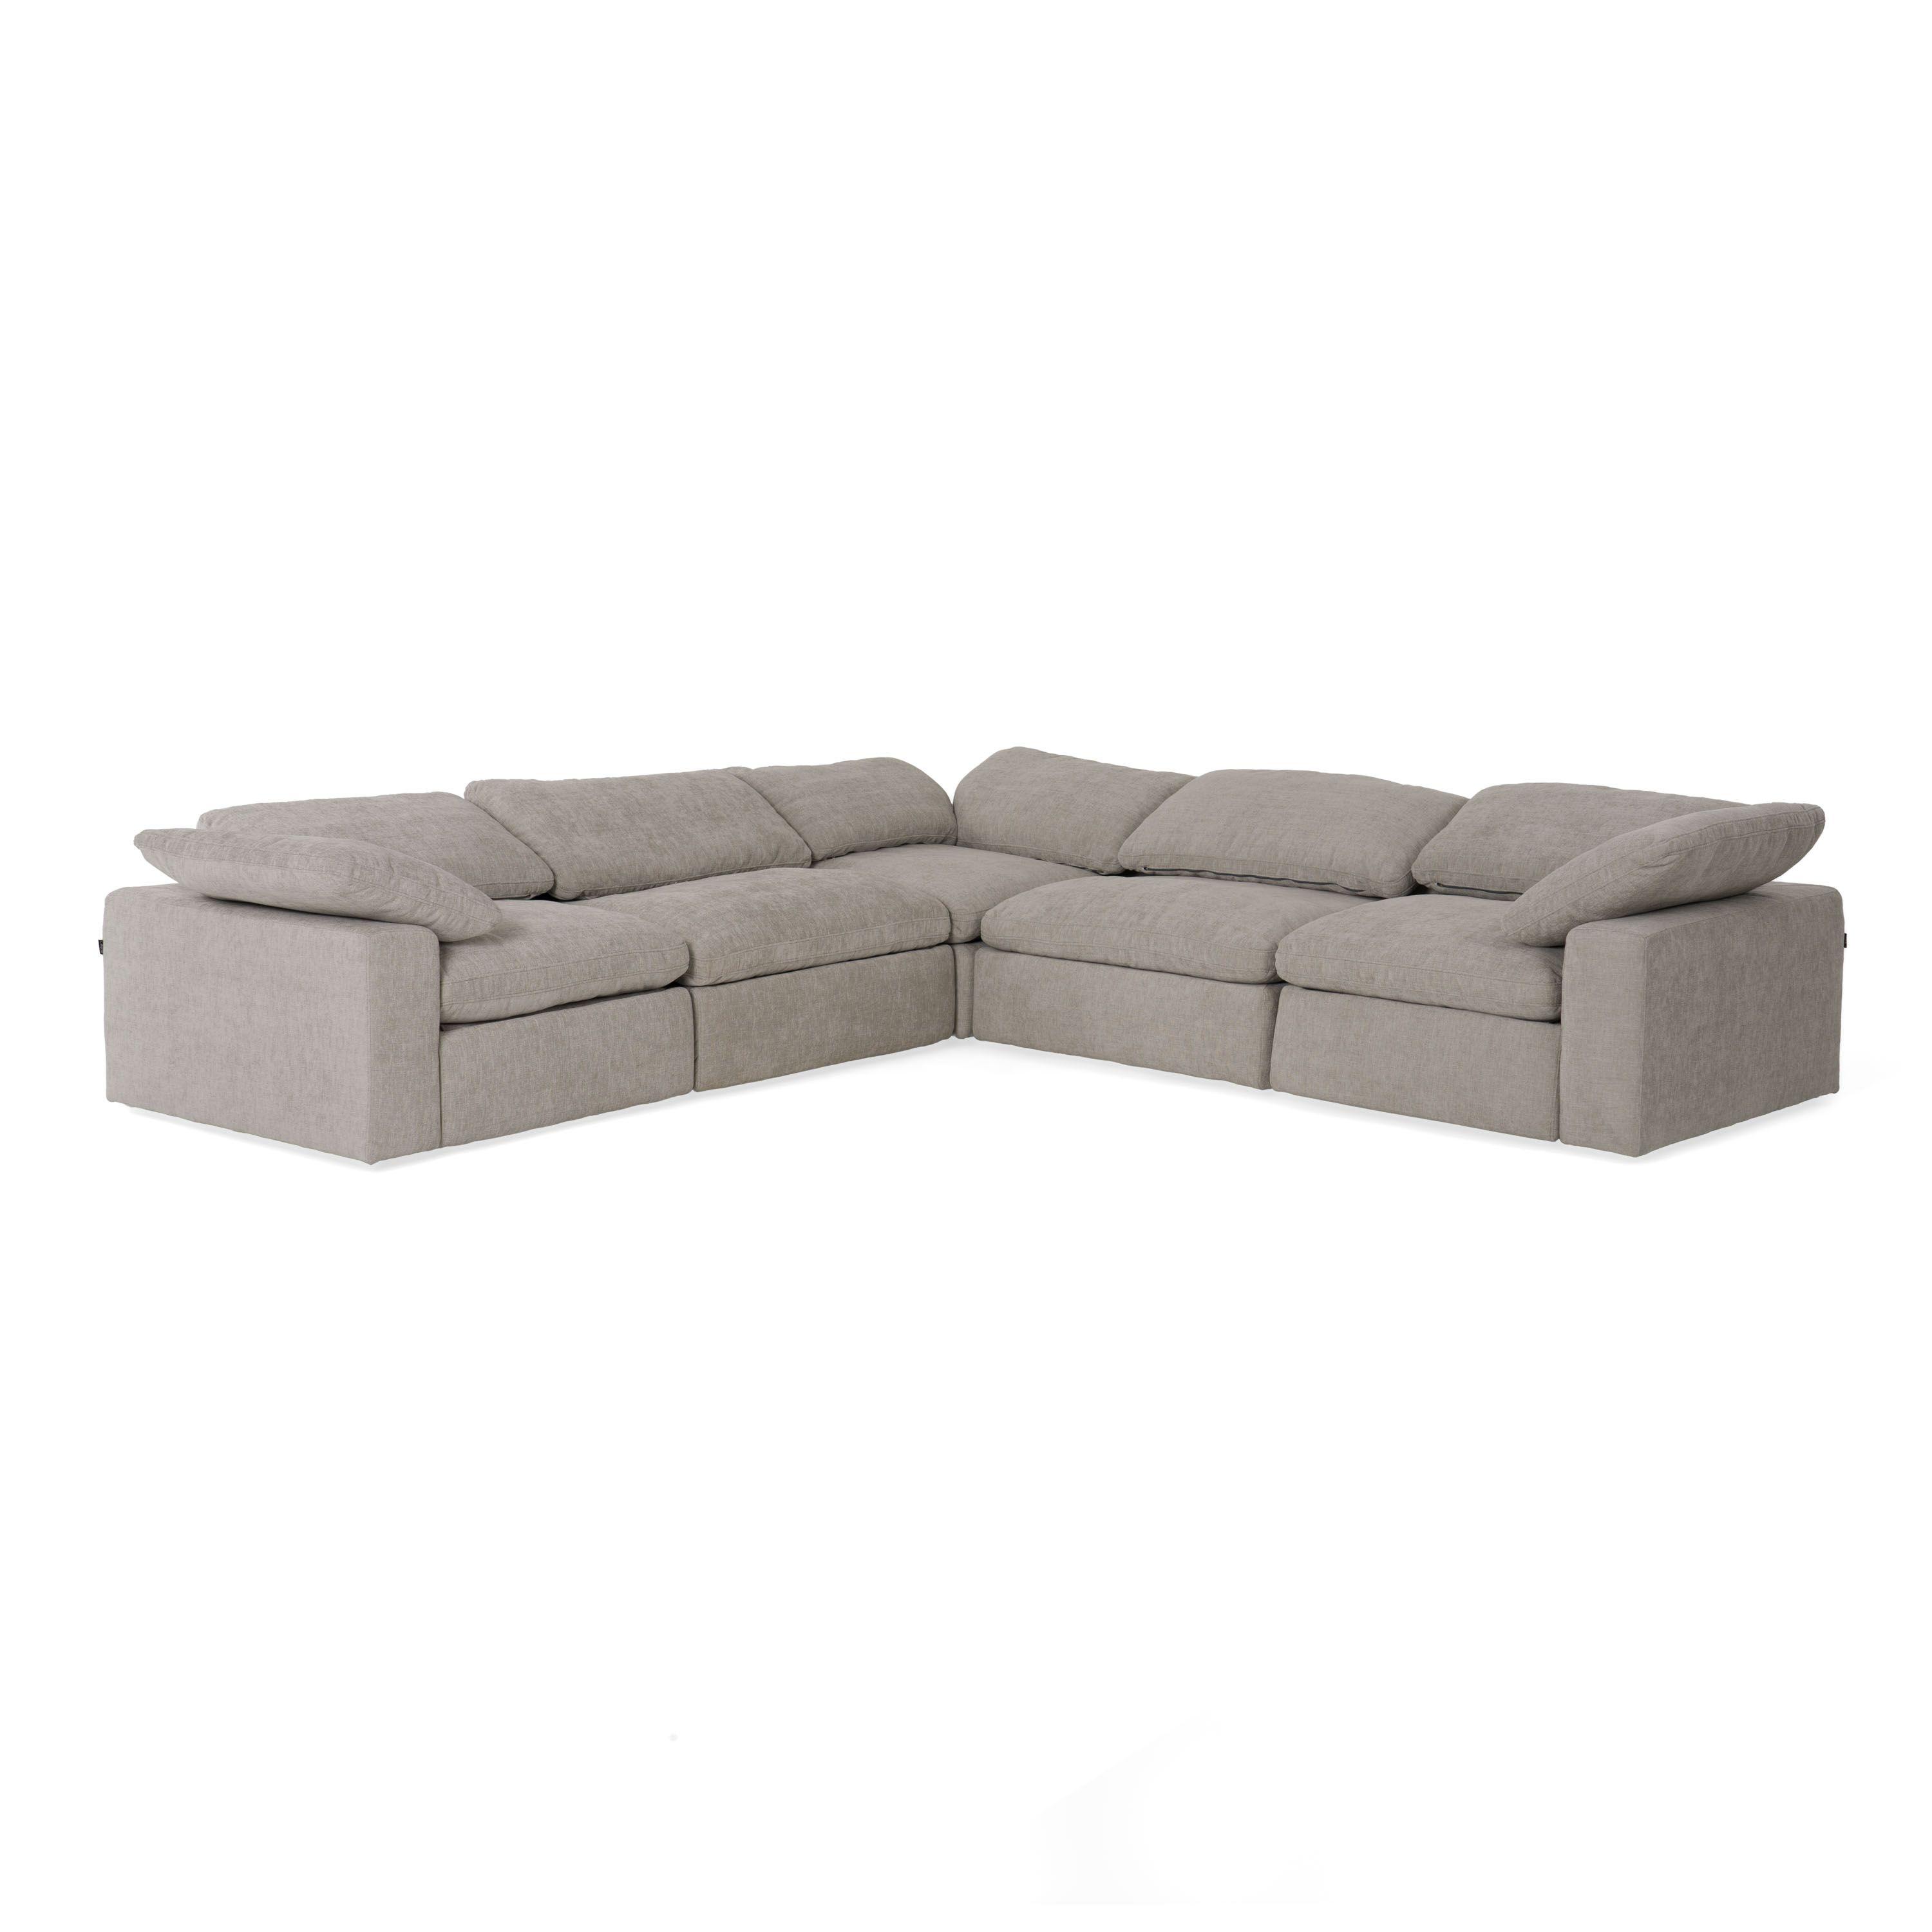 

        
VIG Furniture Corinth Reclining Sectional Sofa VGKM-KM.920-GRY Reclining Sectional Gray Fabric 62151949487879
